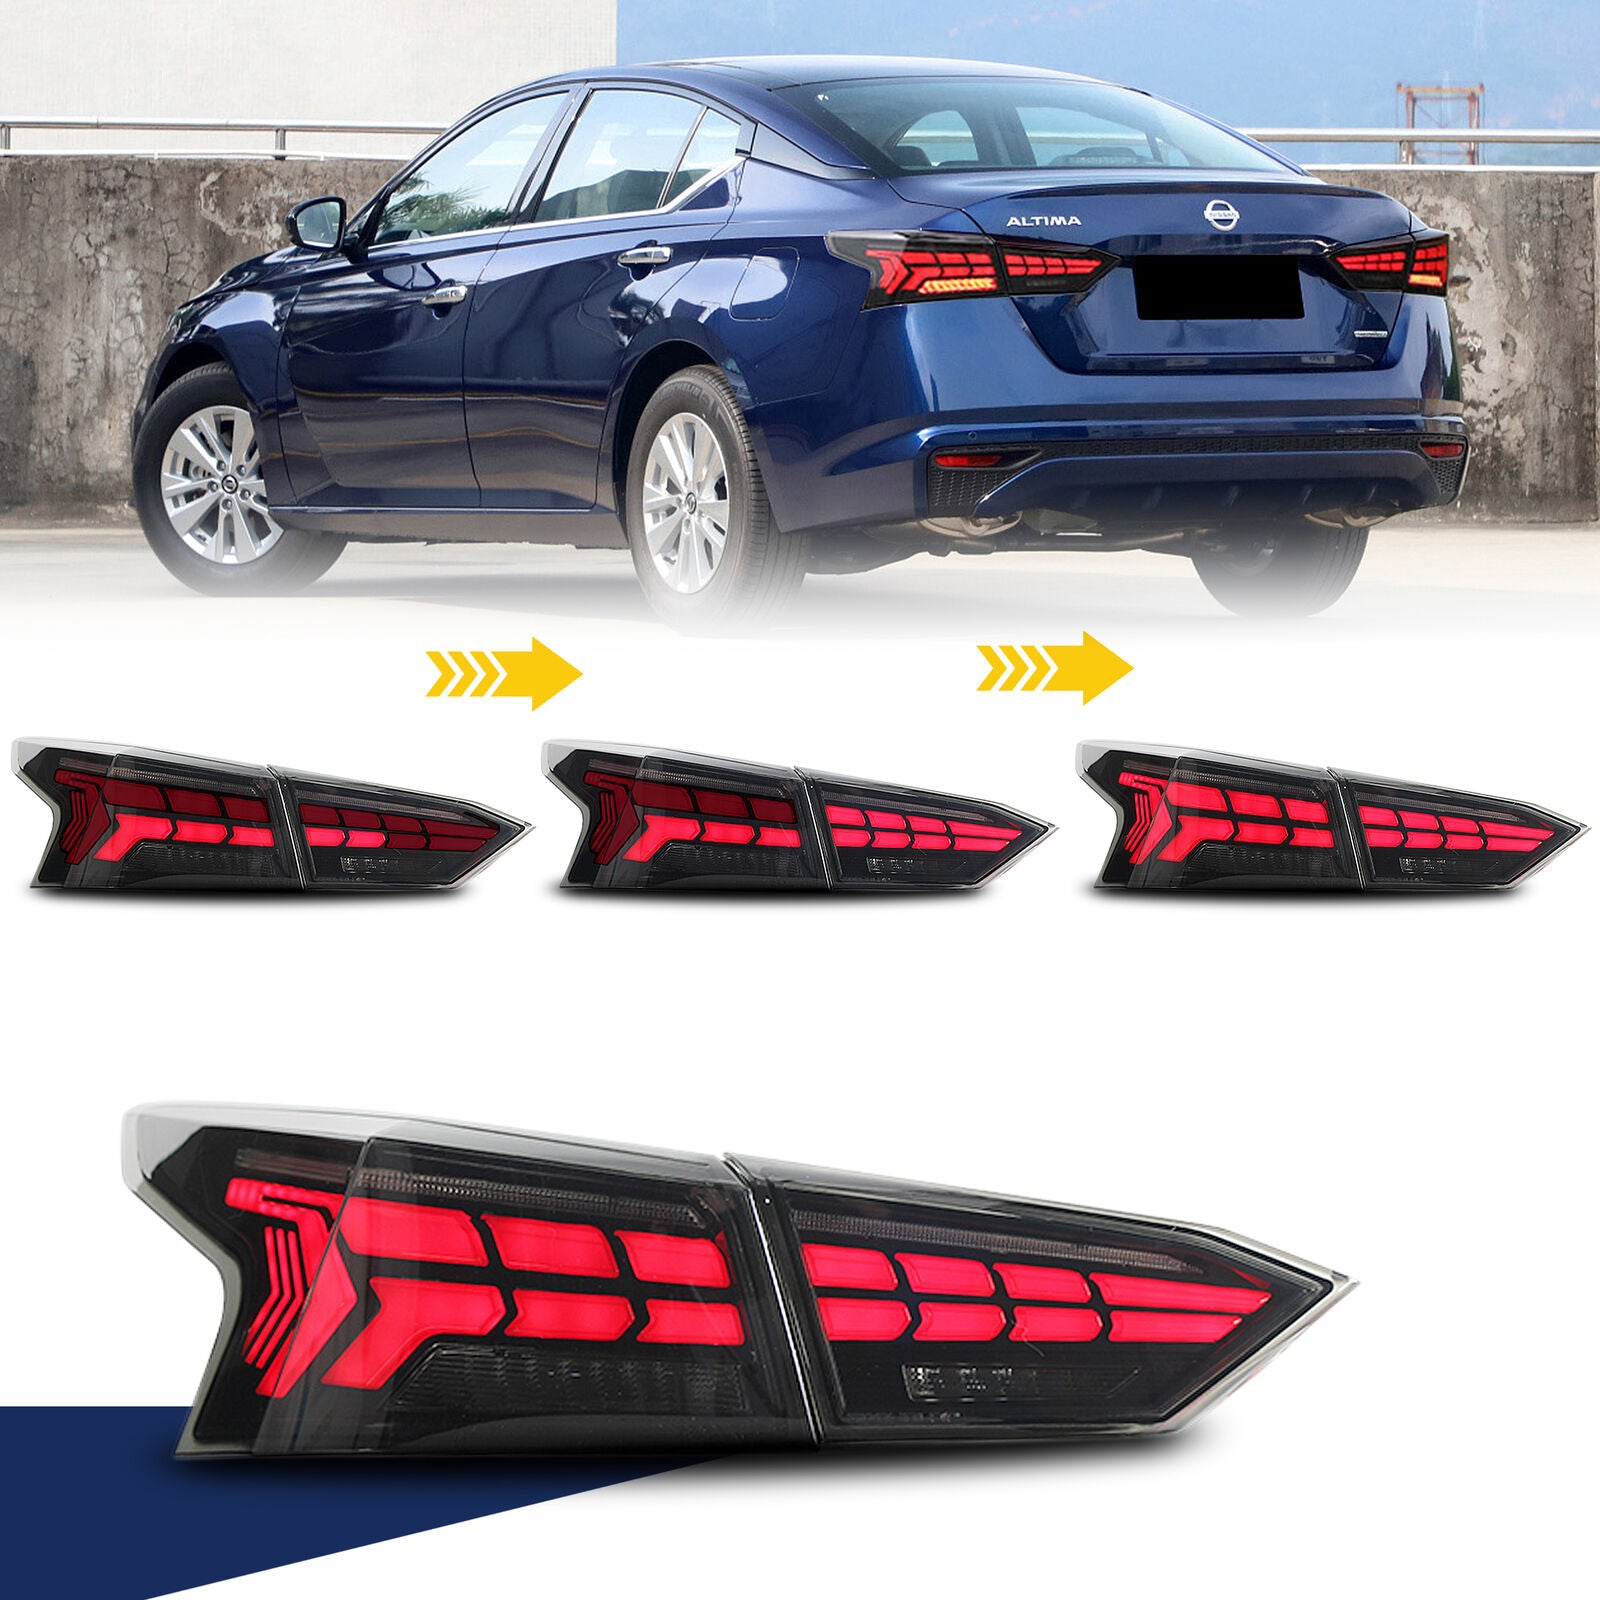 inginuity time LED Tail Lights for Nissan Altima 2019 2020 2021